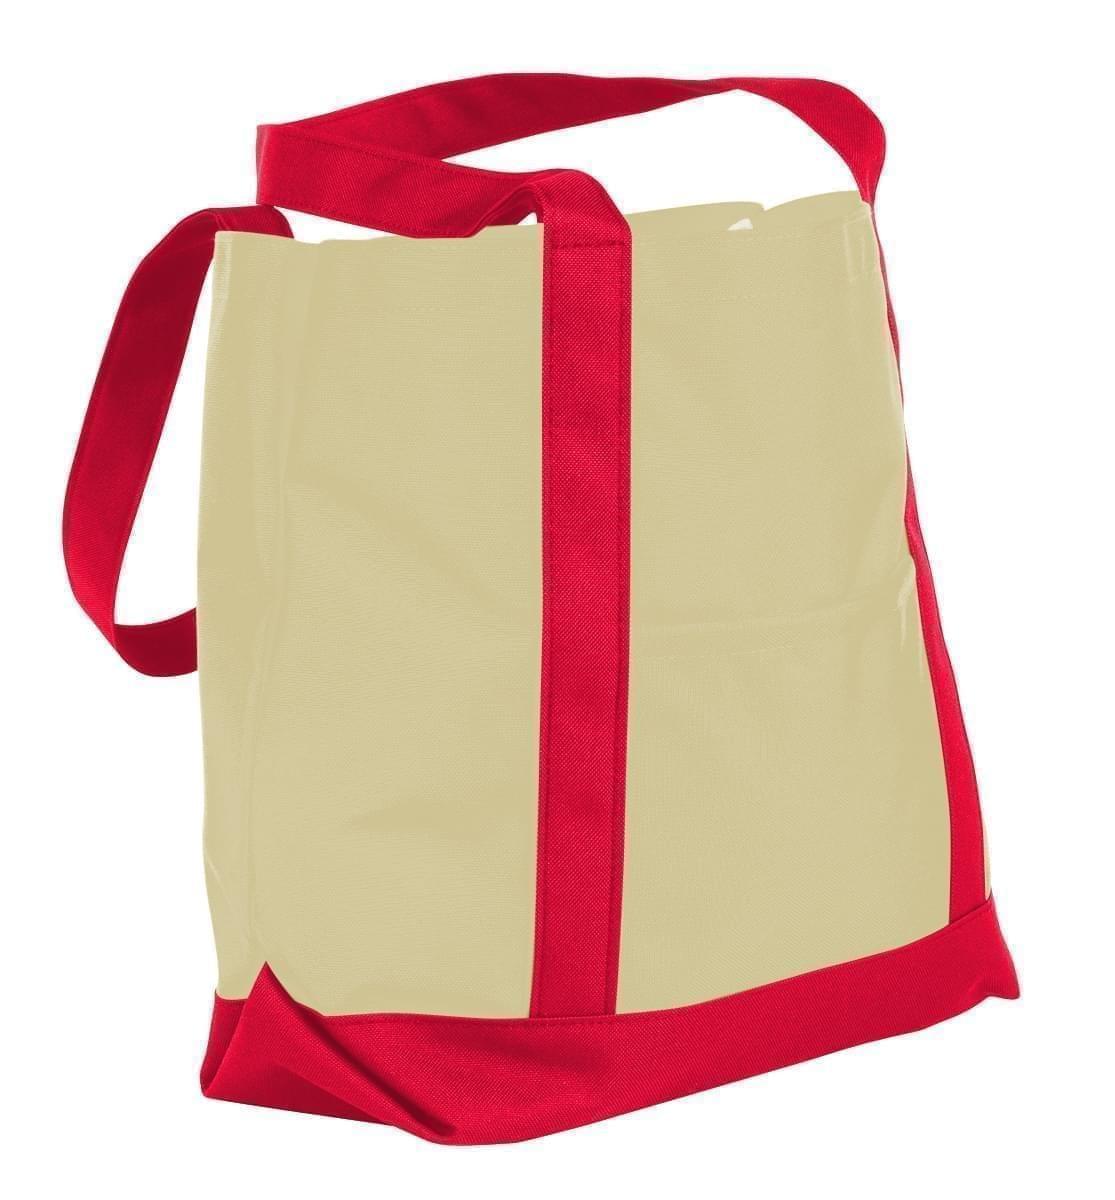 USA Made Canvas Fashion Tote Bags, Natural-Red, XAACL1UAKL